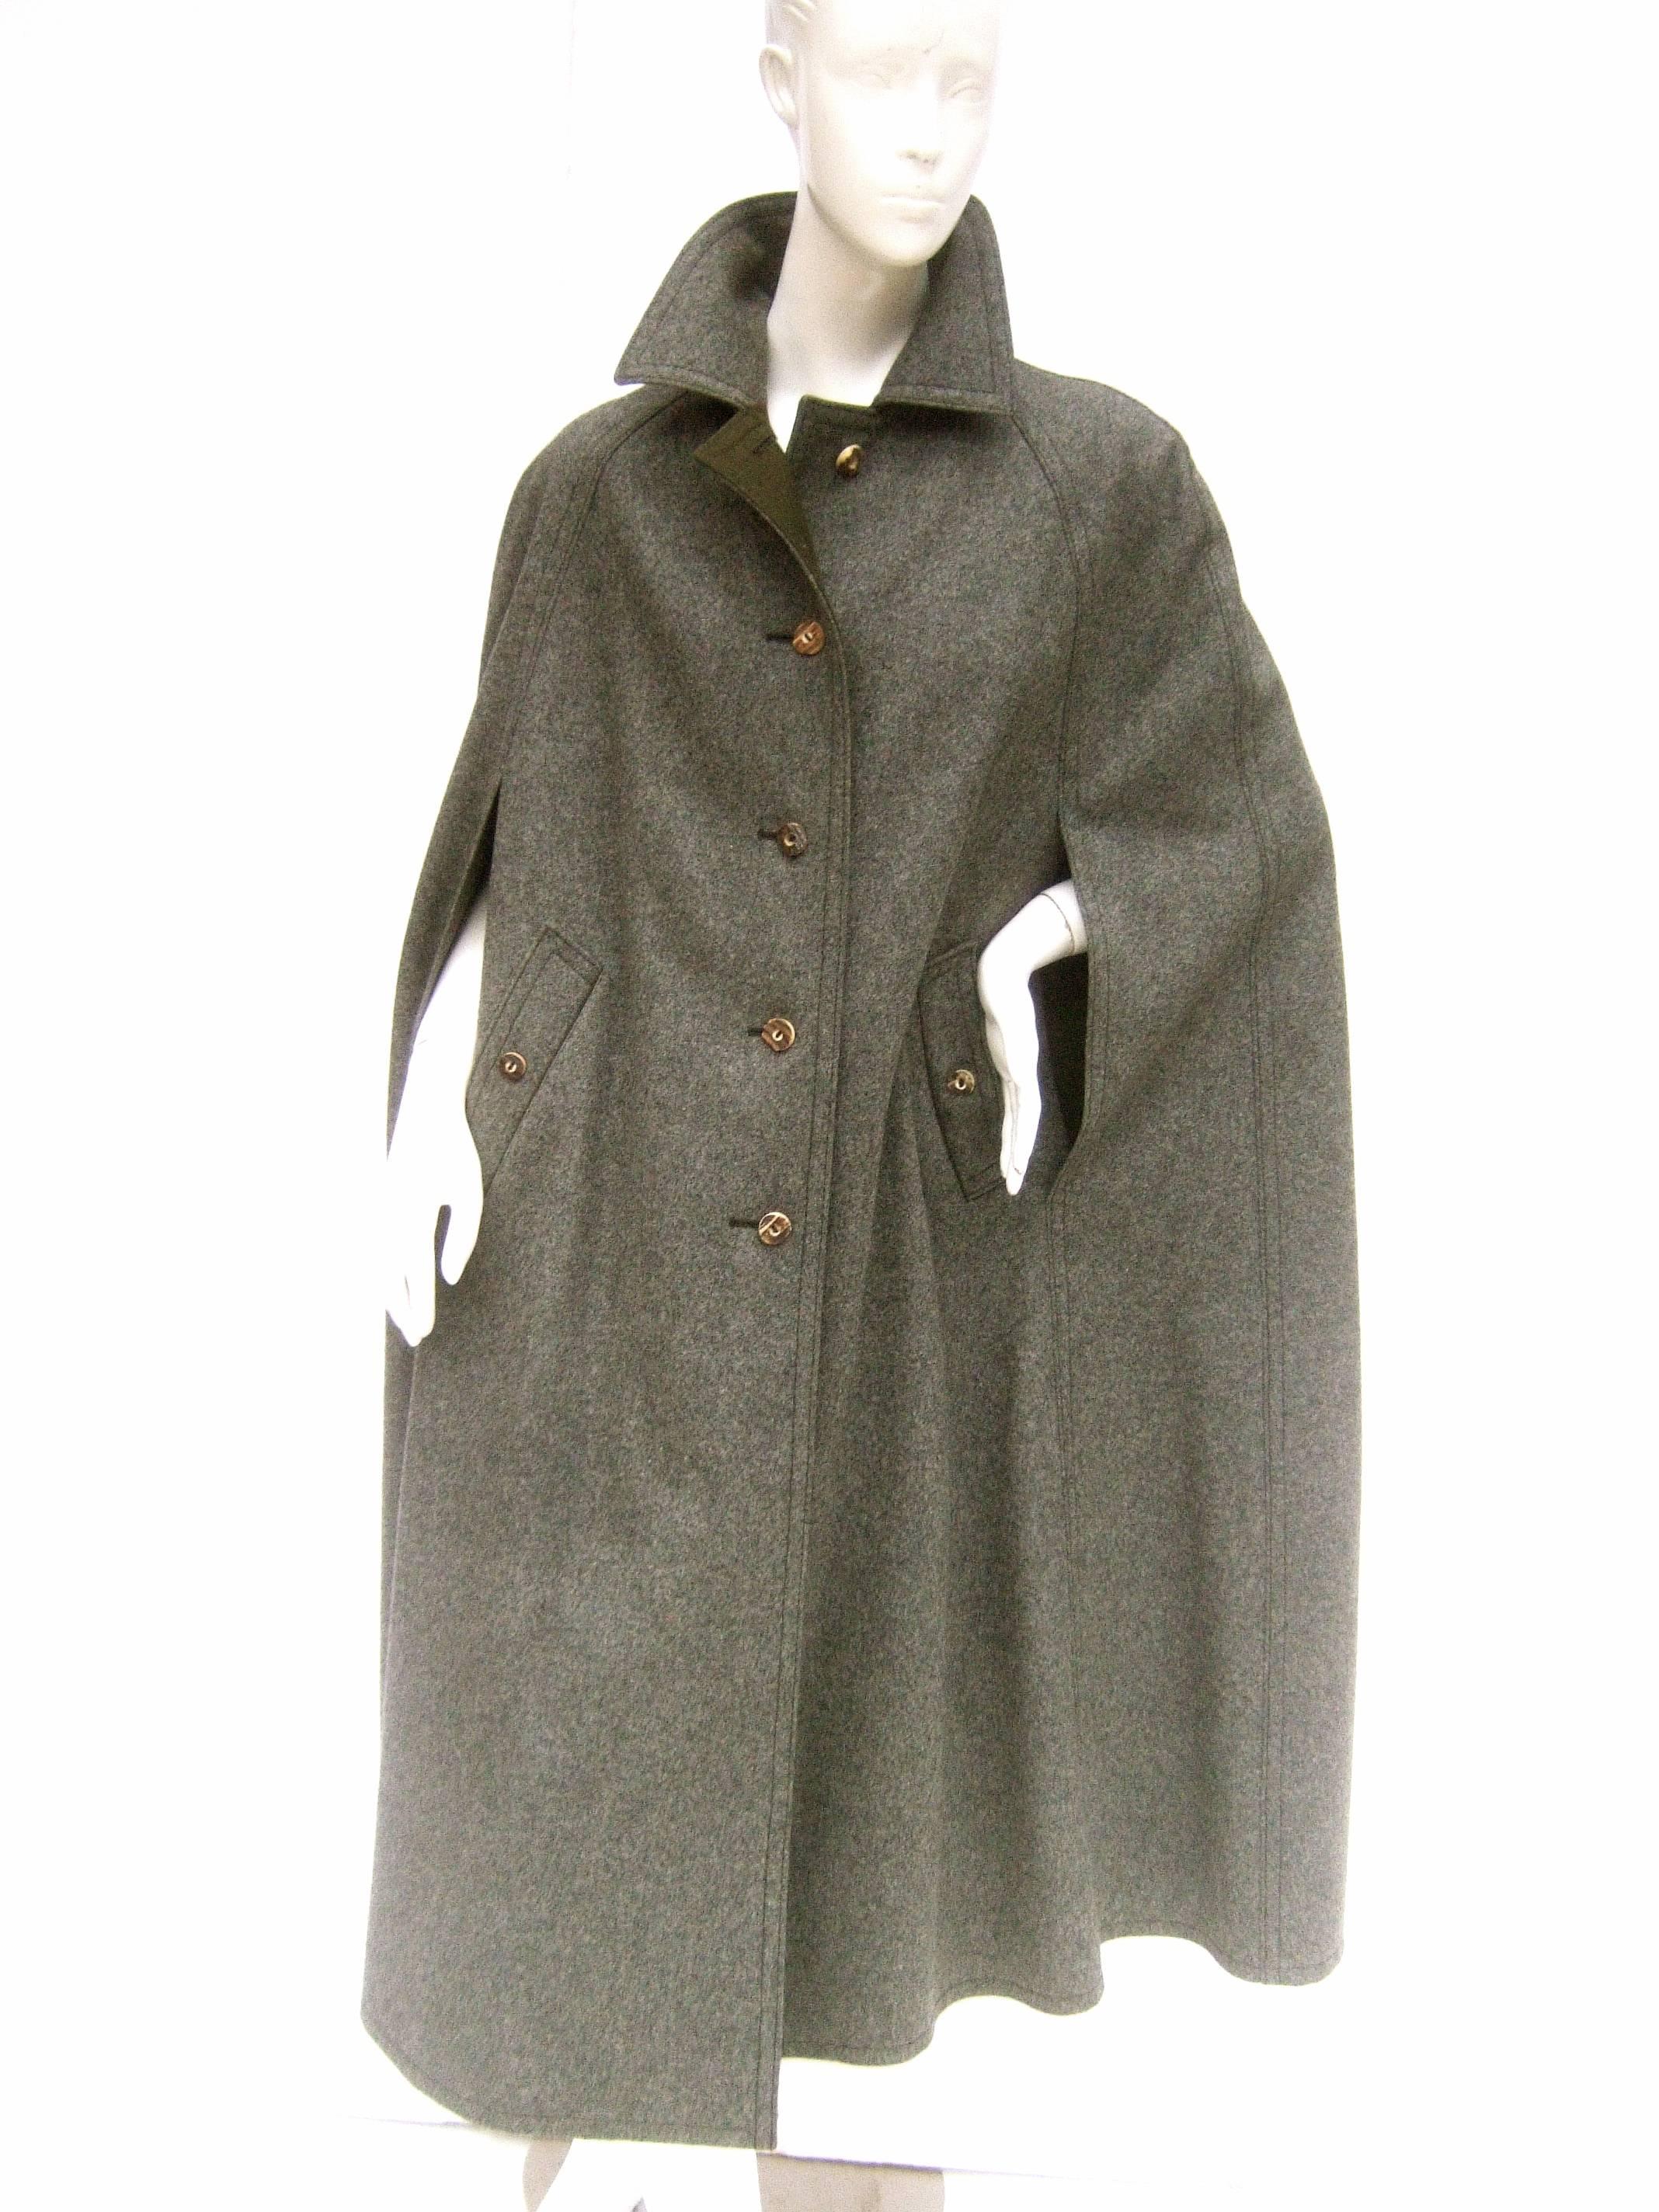 Classic gray flannel wool Austrian cape c 1980s
The stylish wool cape is accented with rustic resin 
horn style buttons 

Designed with slit seams to place the arms thru 
There are a pair of buttoned covered diagonal 
pockets on both front